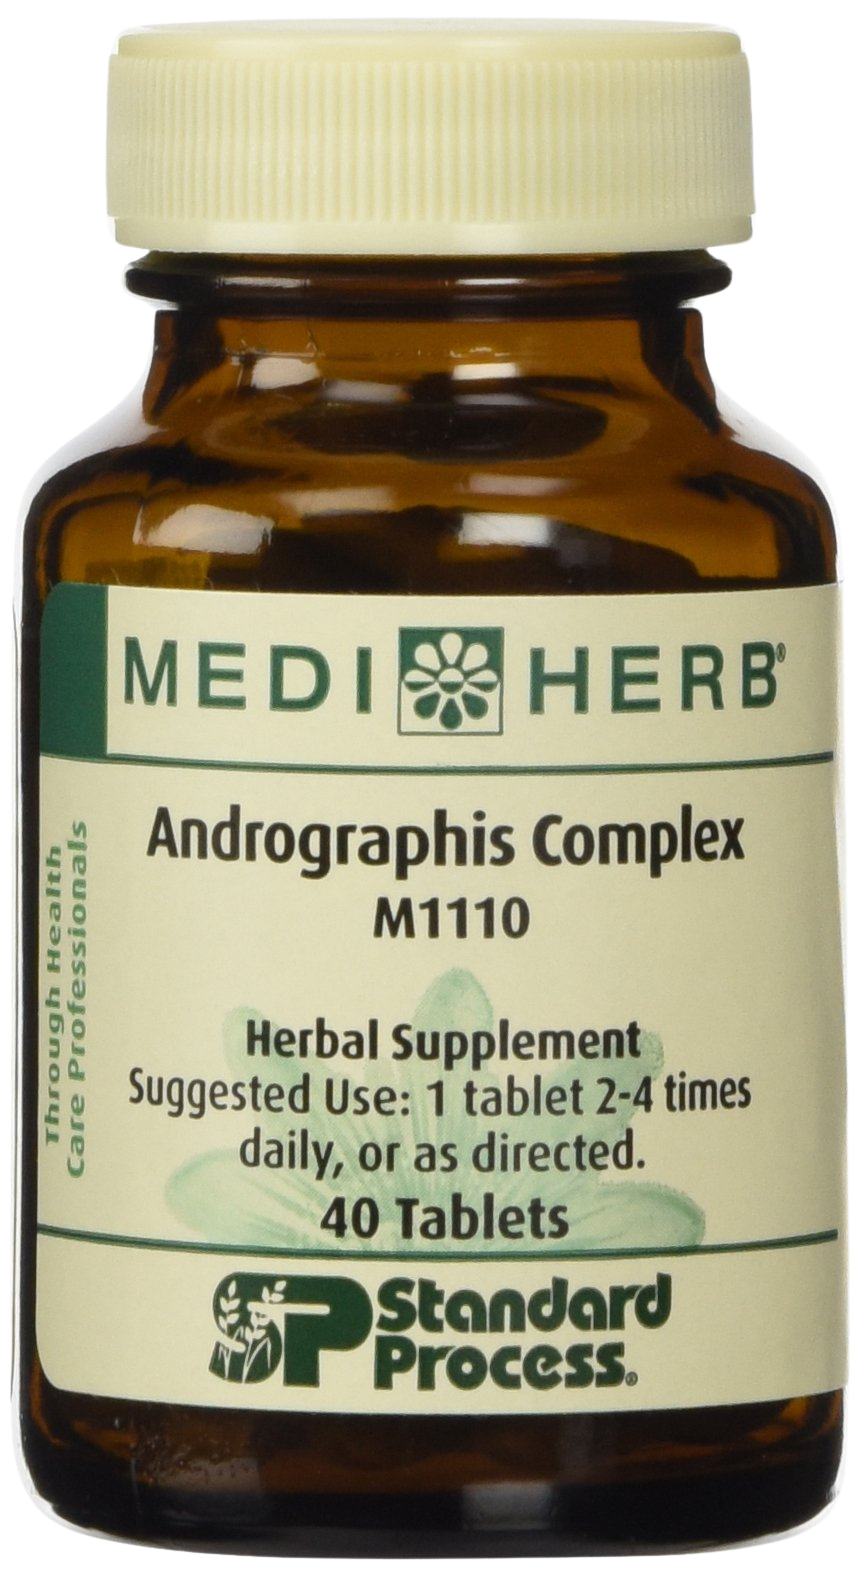 Mediherb - Andrographis Complex 40 Tabs 40 Count (Pack of 1)